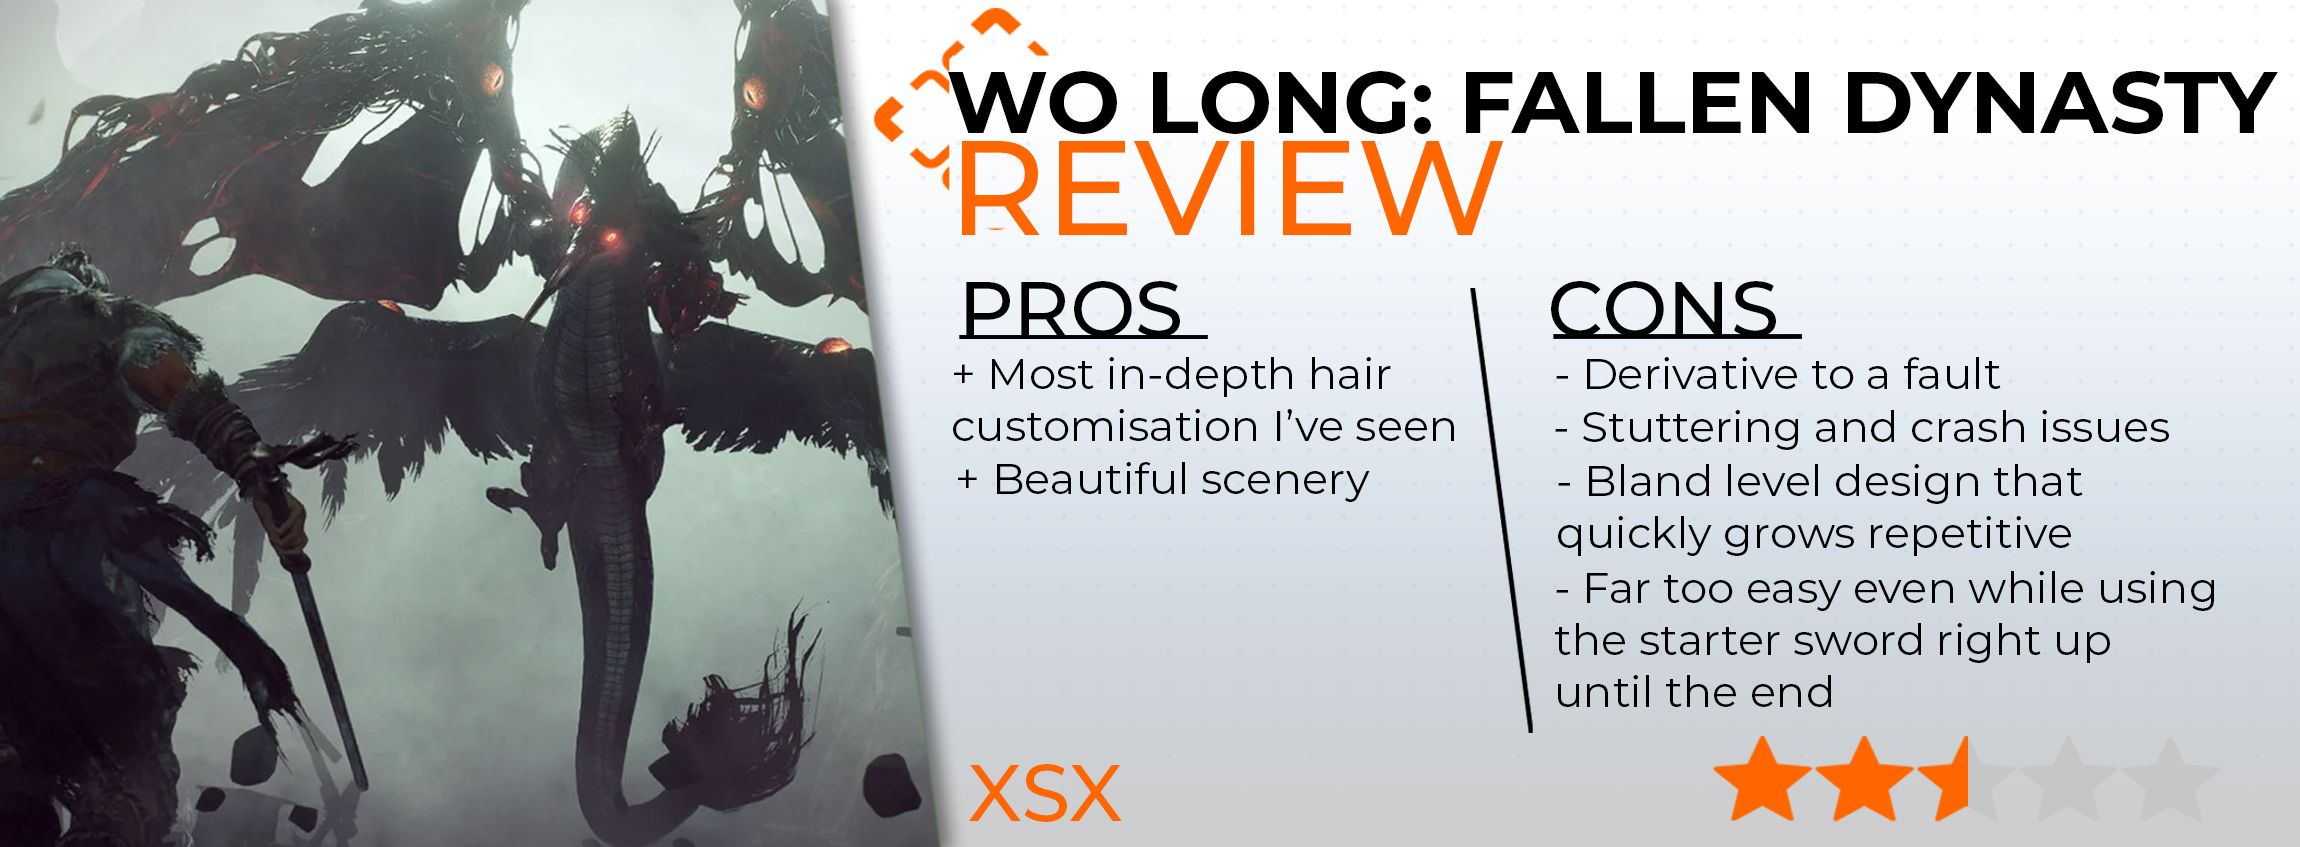 Wo Long Fallen Dynasty Review card showing two and a half stars, played on Xbox Series X